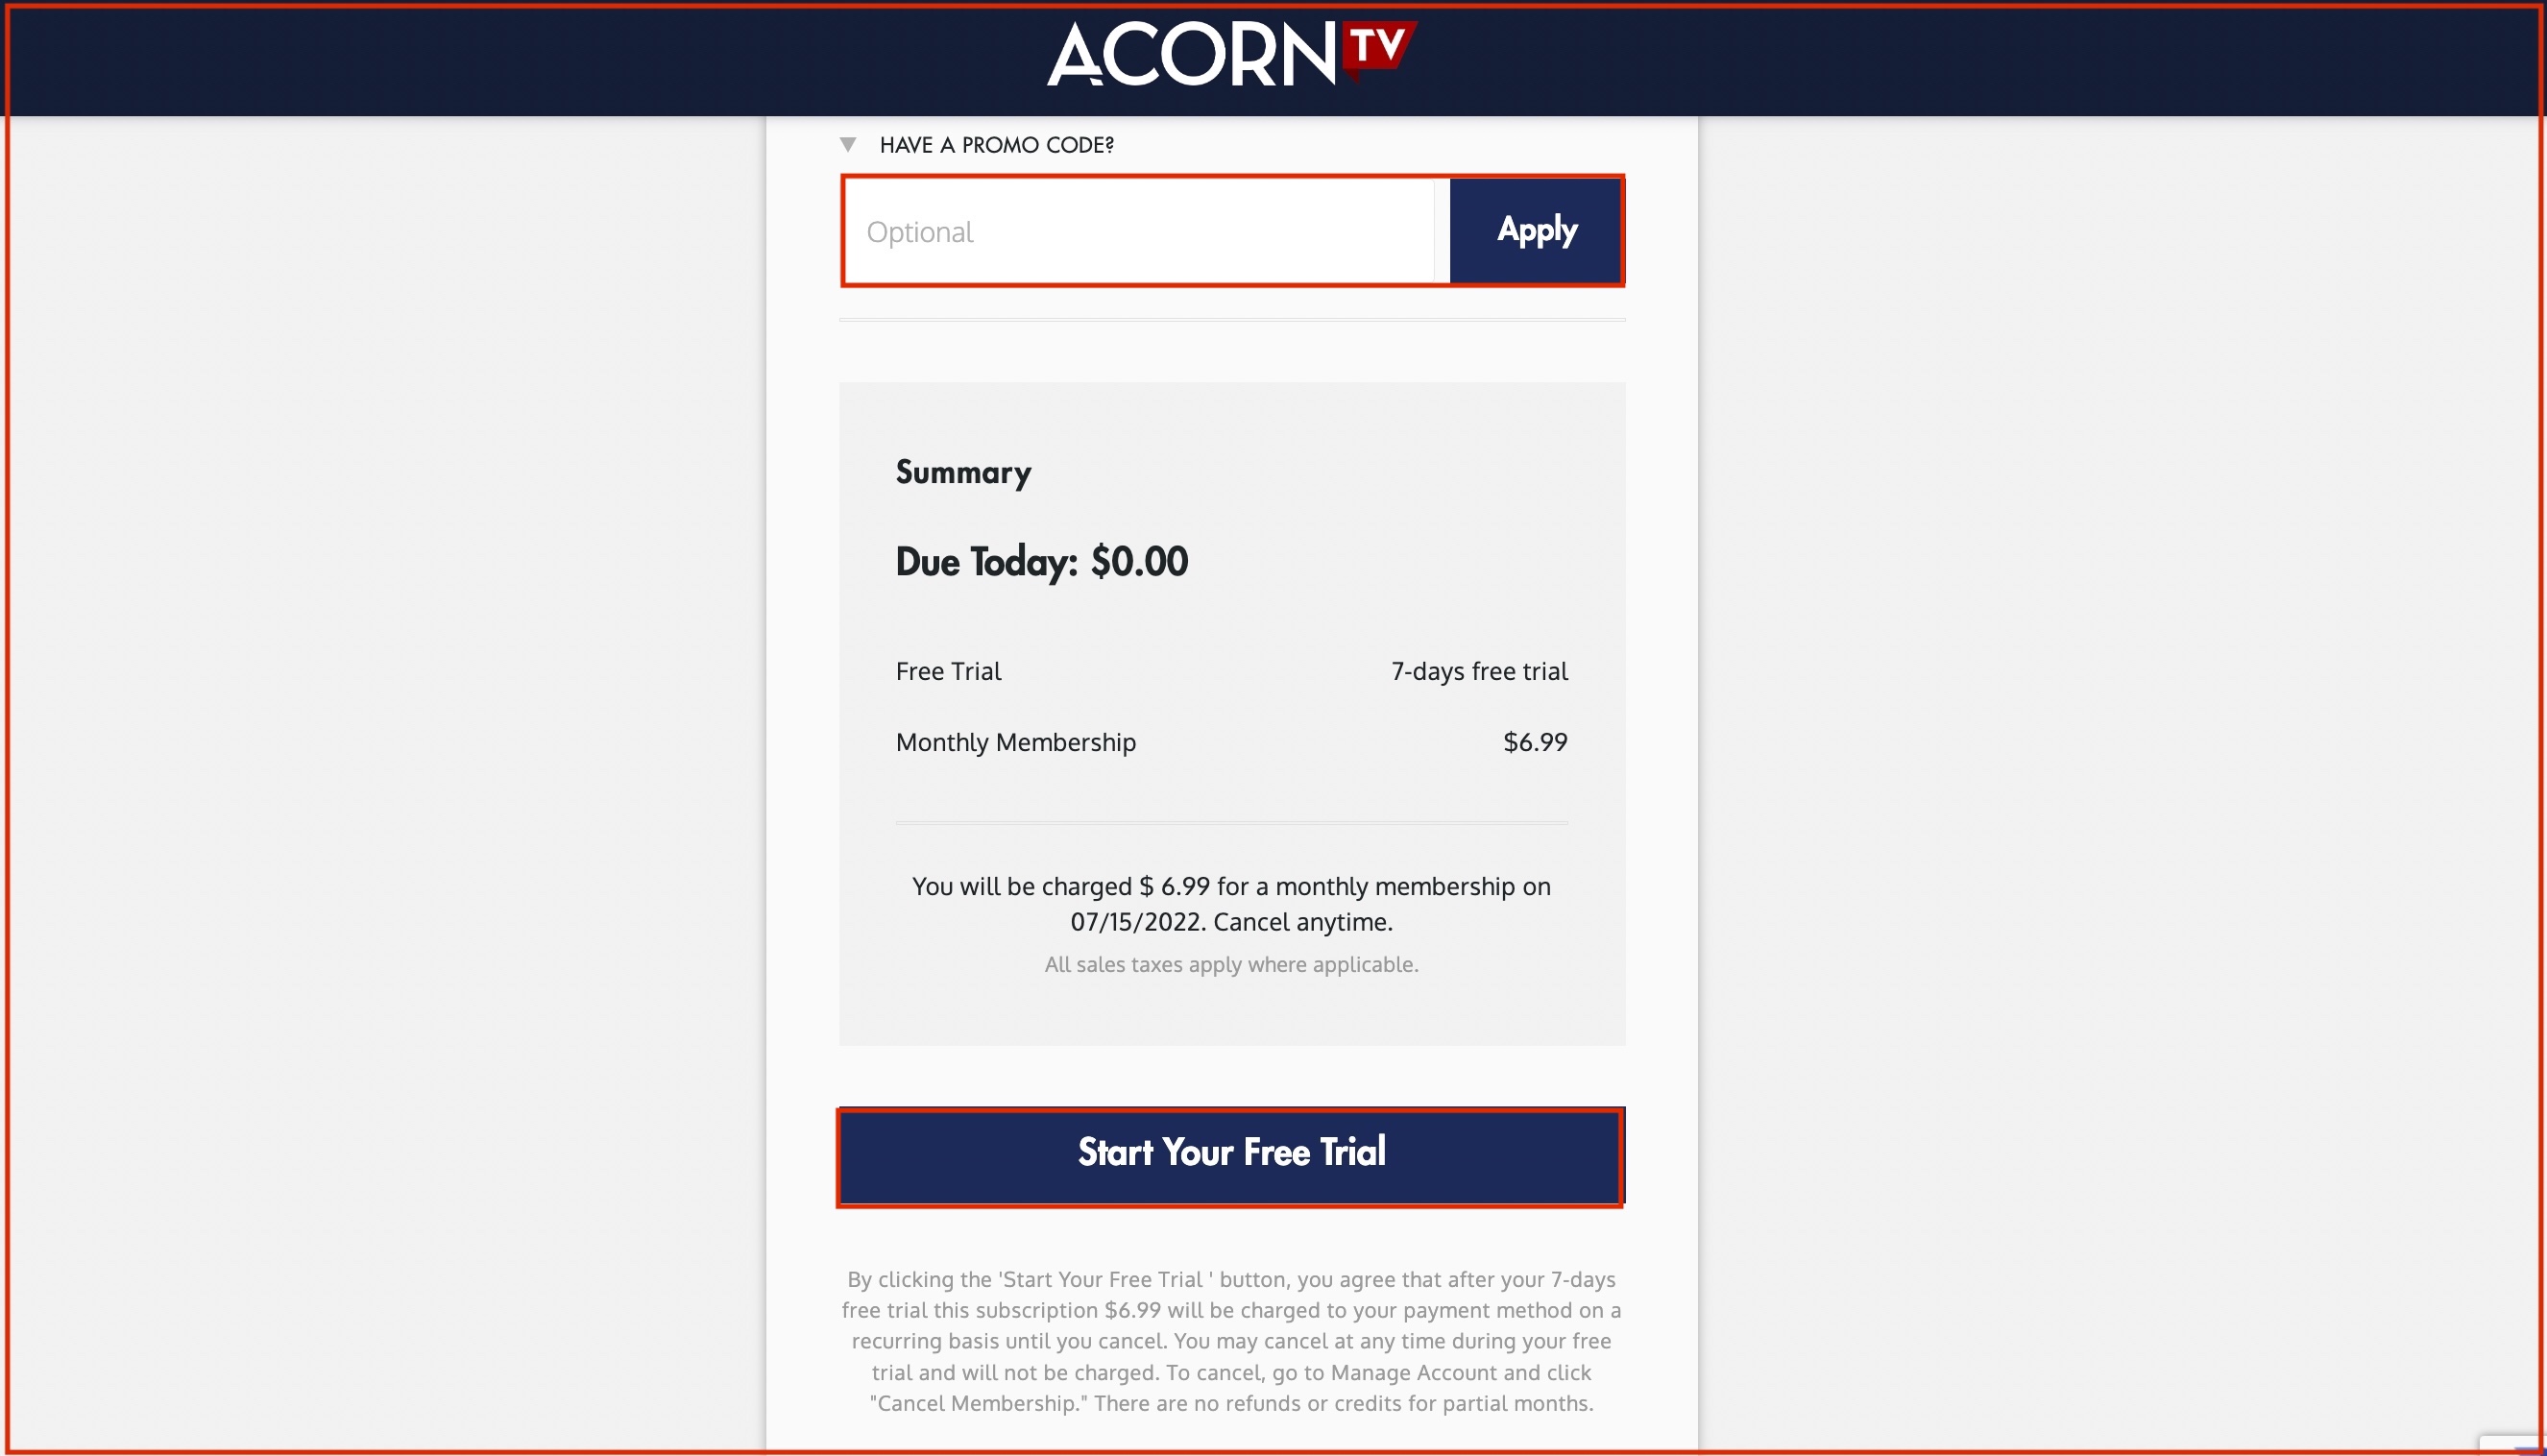 Enter Acorn TV payment and coupon code